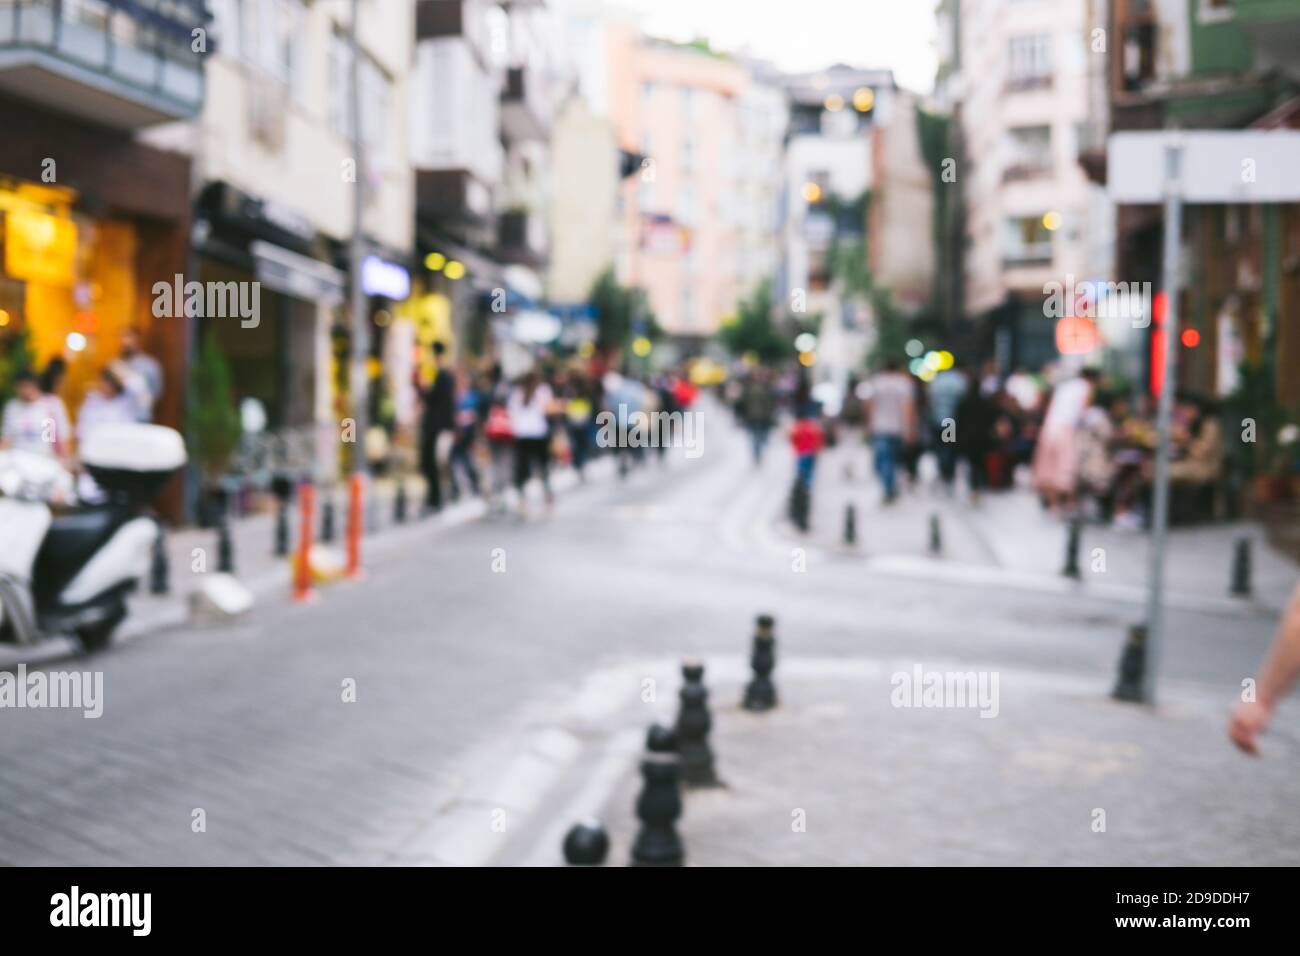 Bright defocused blurred background with unrecognizable people on the sity  street. Abstract image of crowd of people in public place Stock Photo -  Alamy